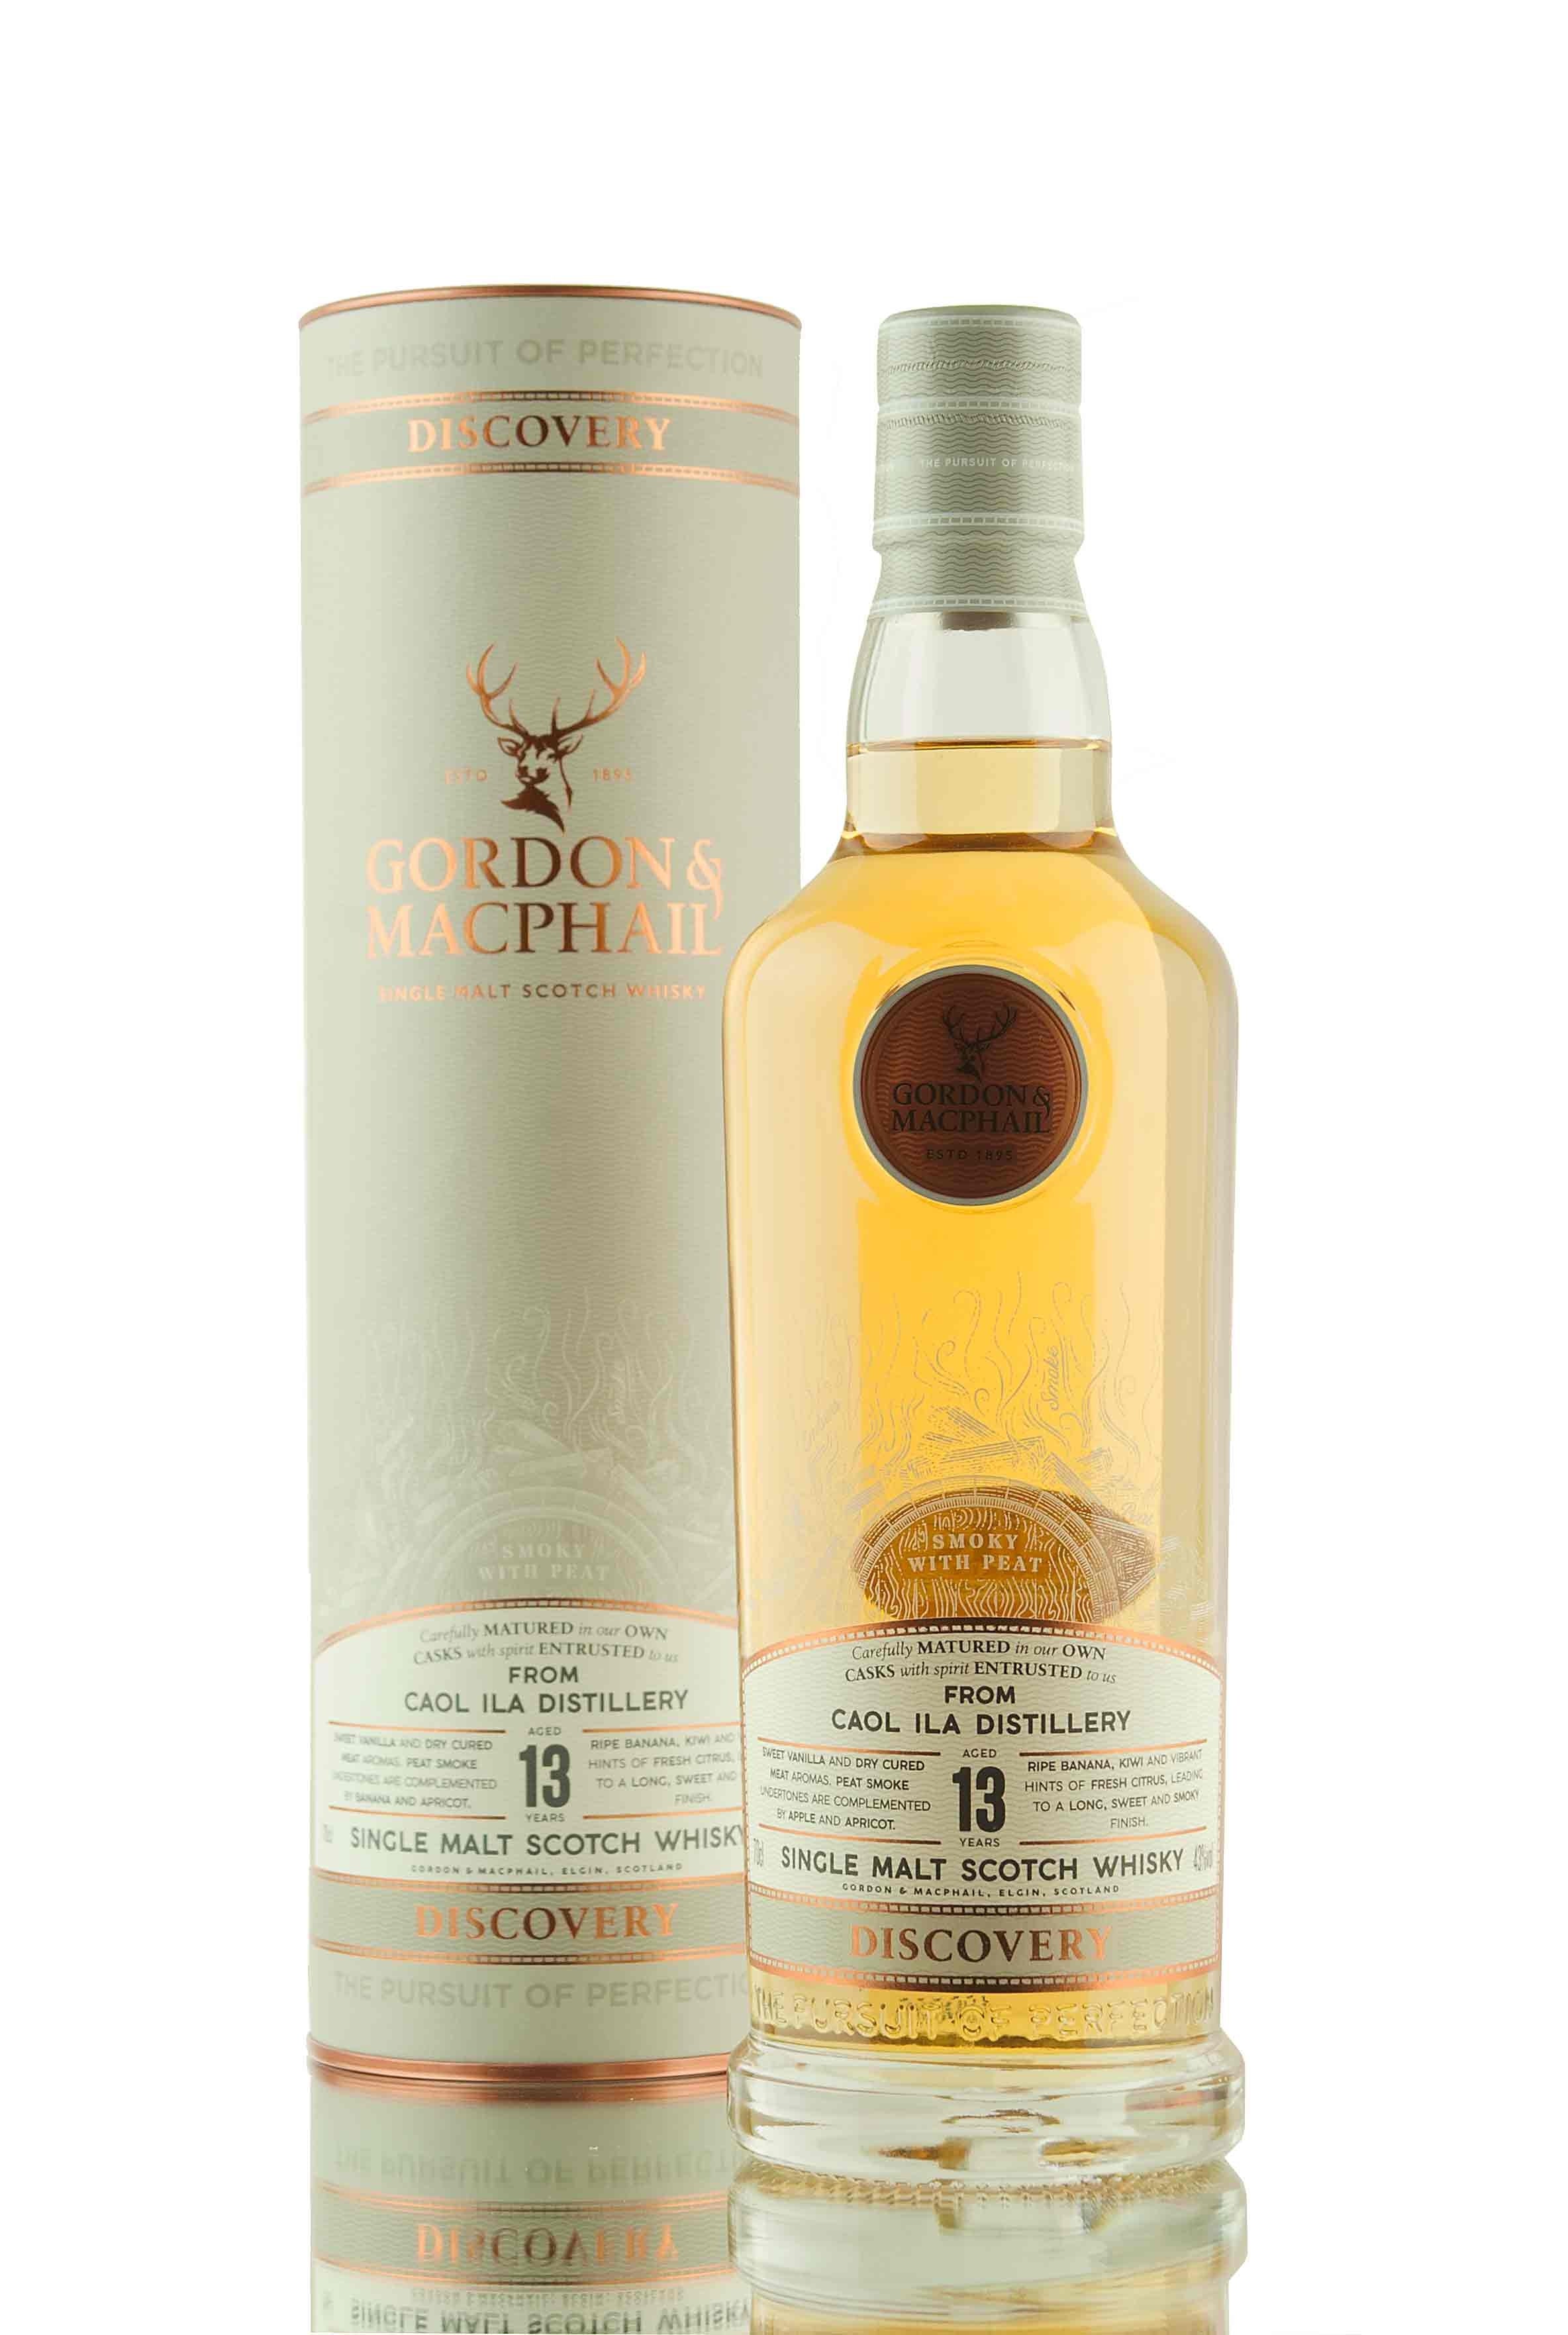 Caol Ila 13 Year Old - Discovery